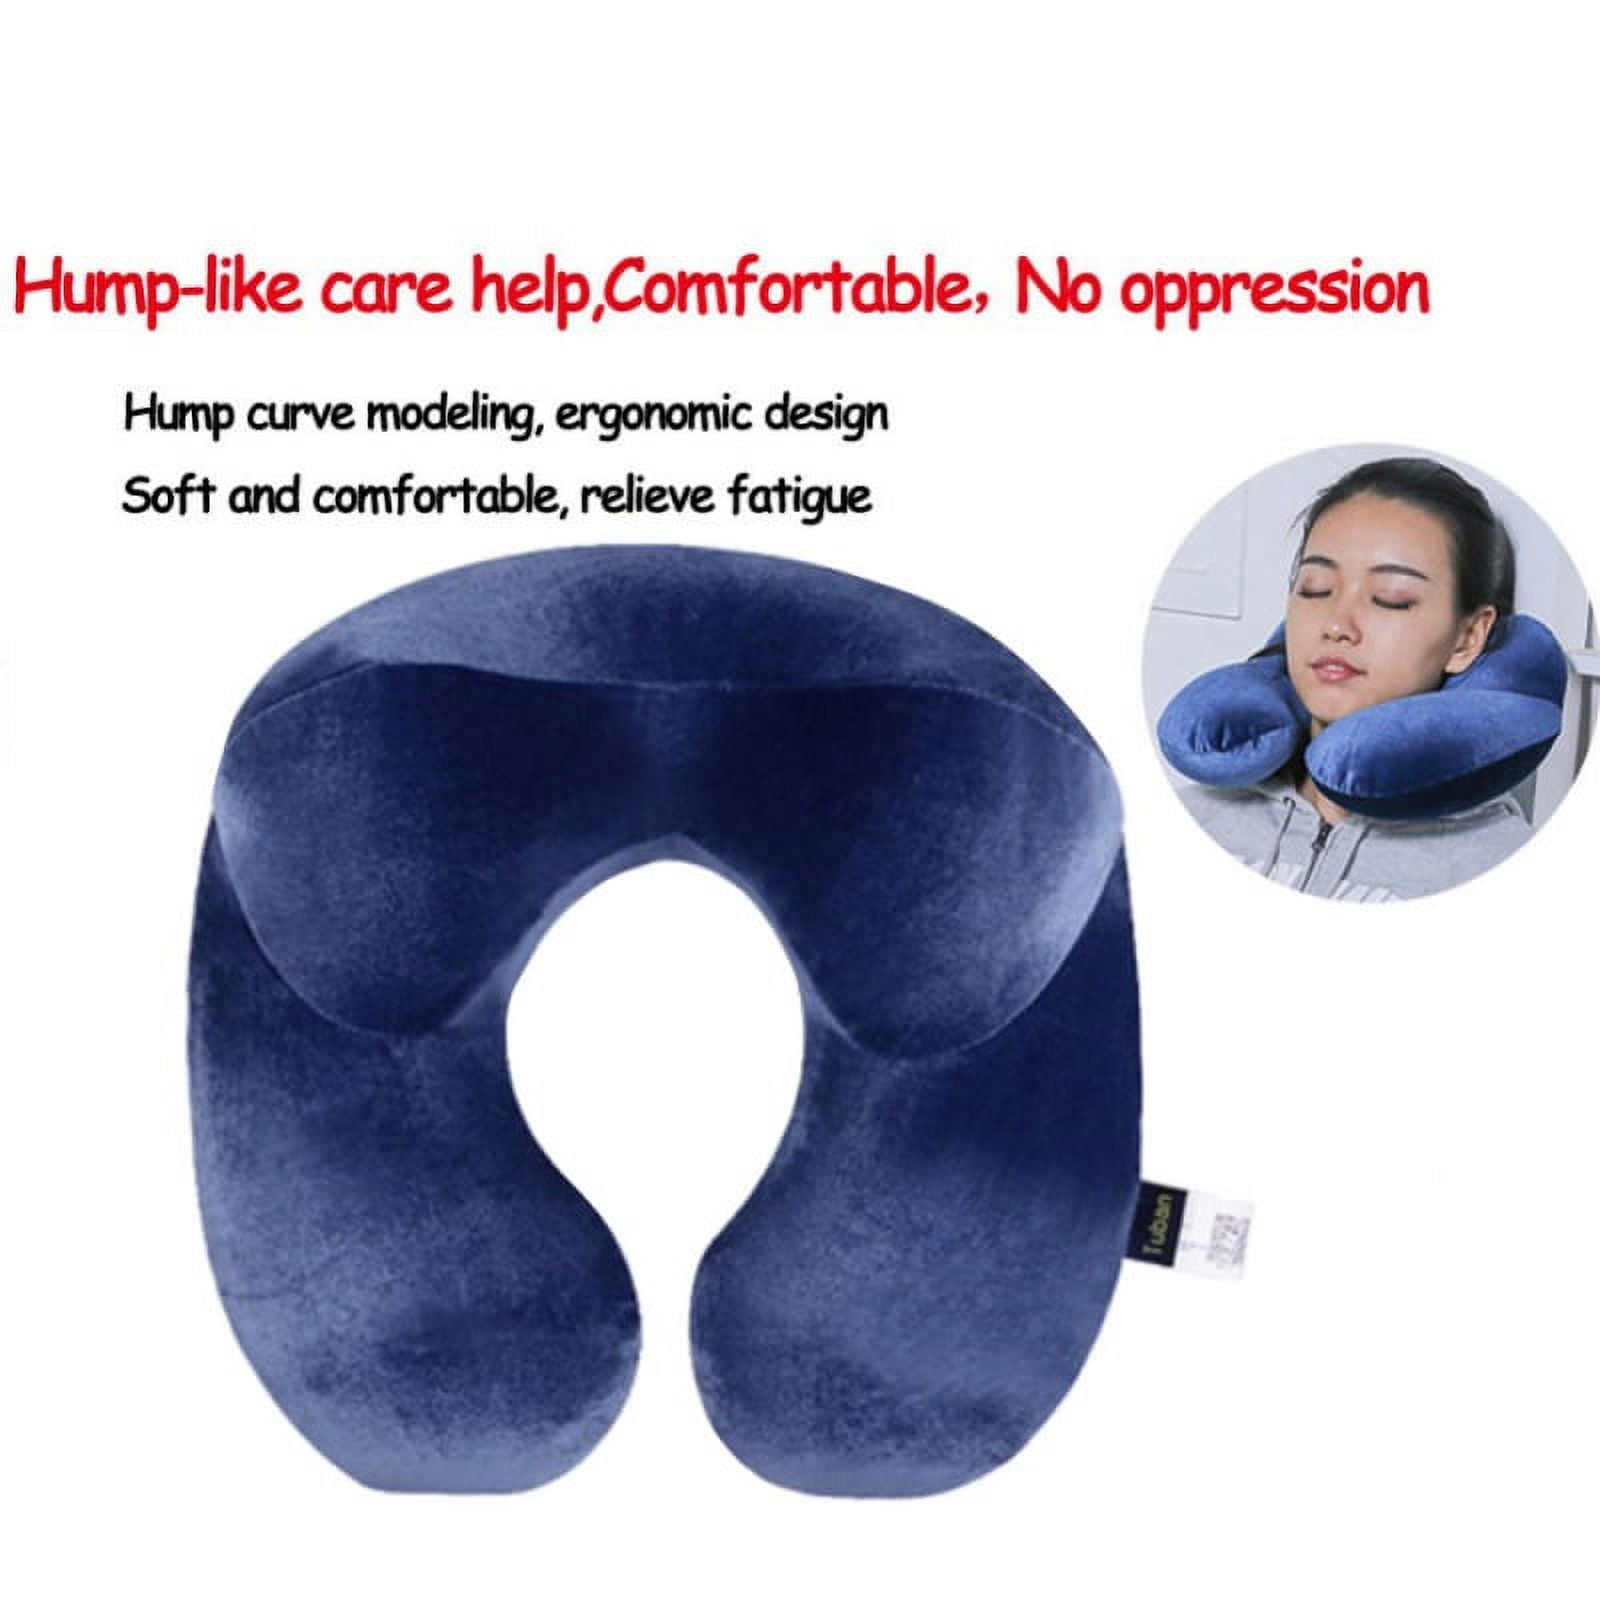 Hawk Travel Pro: 17 x 11 inch Inflatable Neck Pillow